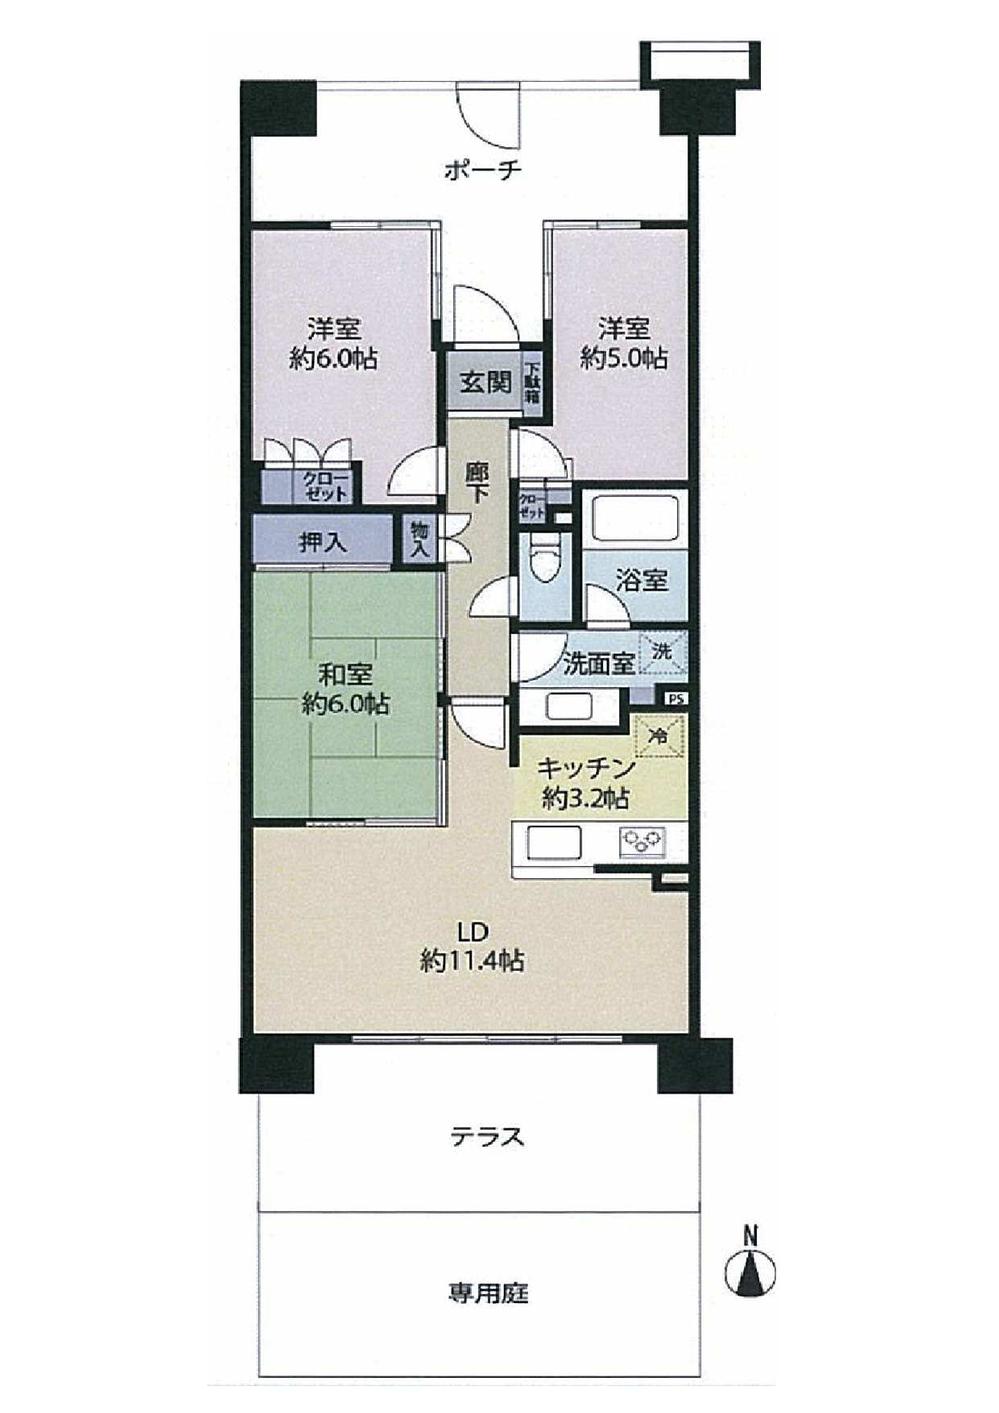 Floor plan. 3LDK, Price 36,800,000 yen, Occupied area 68.55 sq m , Balcony area 13.8 sq m south side room of the terrace and the garden is recommended This room has a privacy has been protected by a large entrance porch.